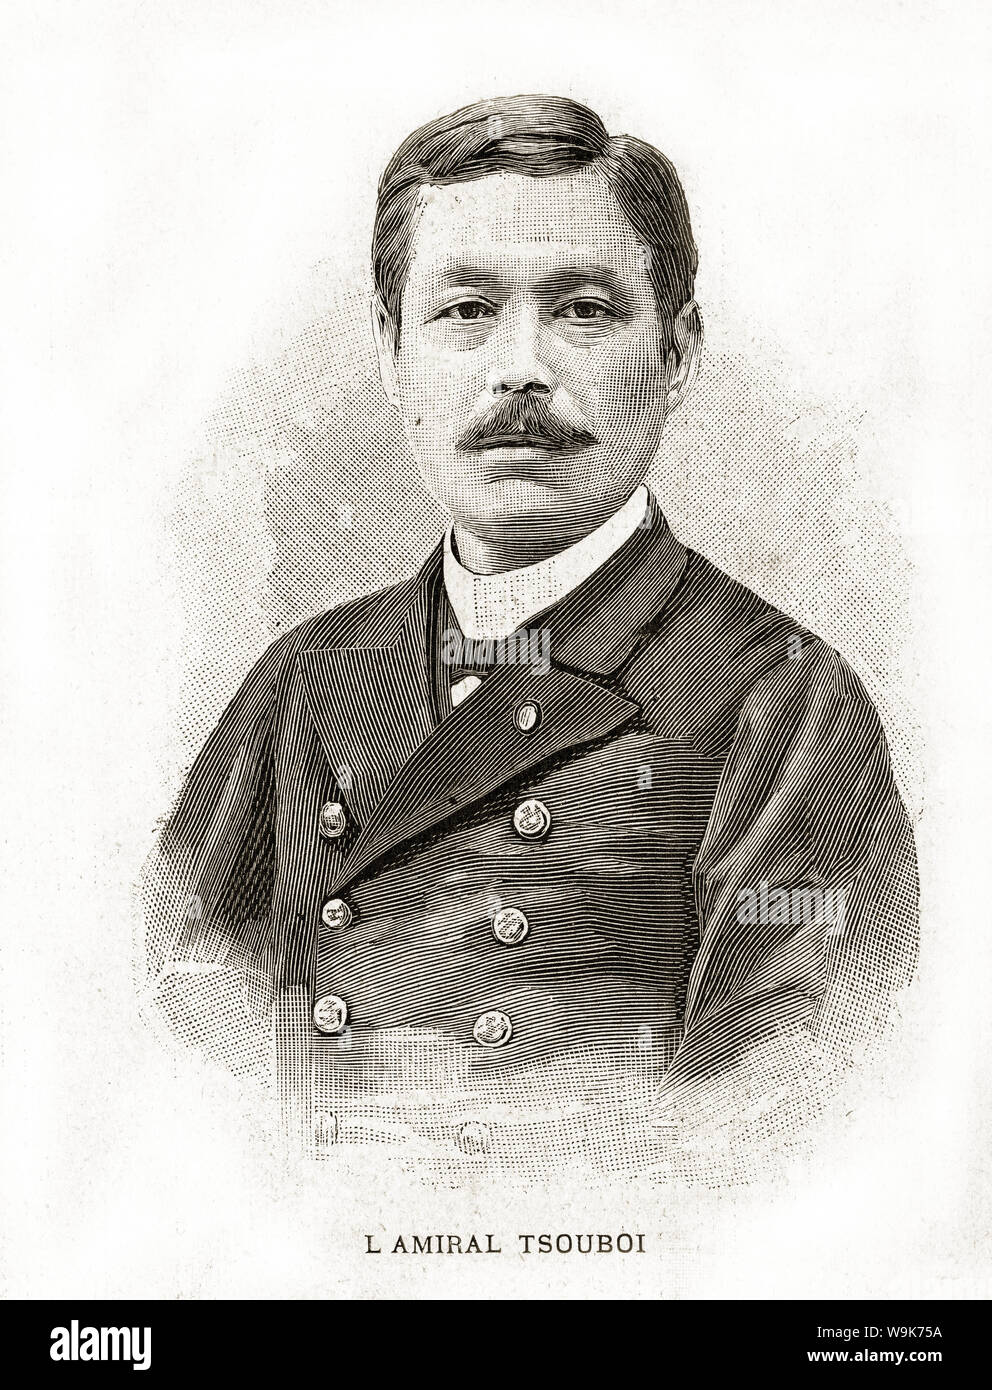 [ 1890s Japan - Japanese Admiral Kozo Tsuboi ] —   Kozo Tsuboi (坪井航三, 1843–1898) was an admiral of the Imperial Japanese Navy. He served during the First Sino-Japanese War (1894–1895).  Published in the French illustrated weekly L’Illustration on February 16, 1895 (Meiji 28).  19th century vintage newspaper illustration. Stock Photo